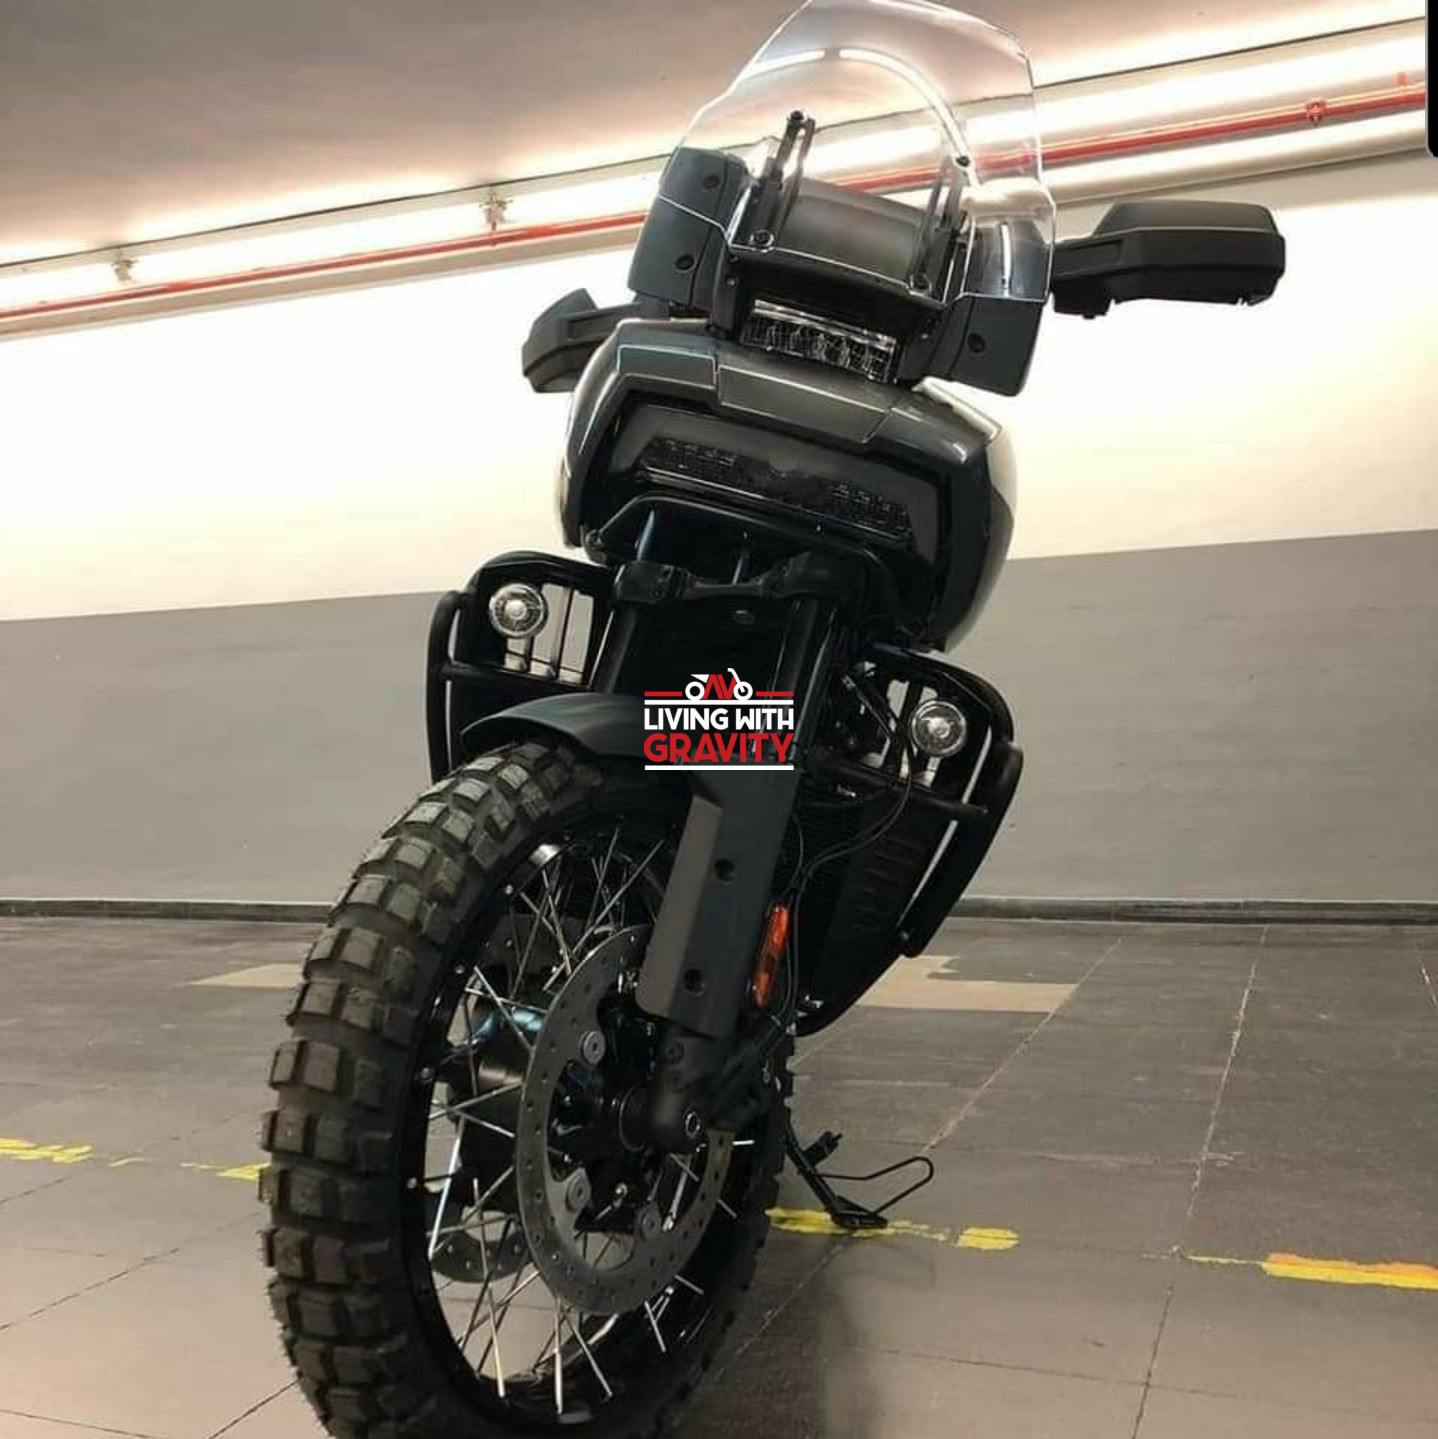 2021 Harley Pan America Spotted Adrenaline Culture Of Motorcycle And Speed